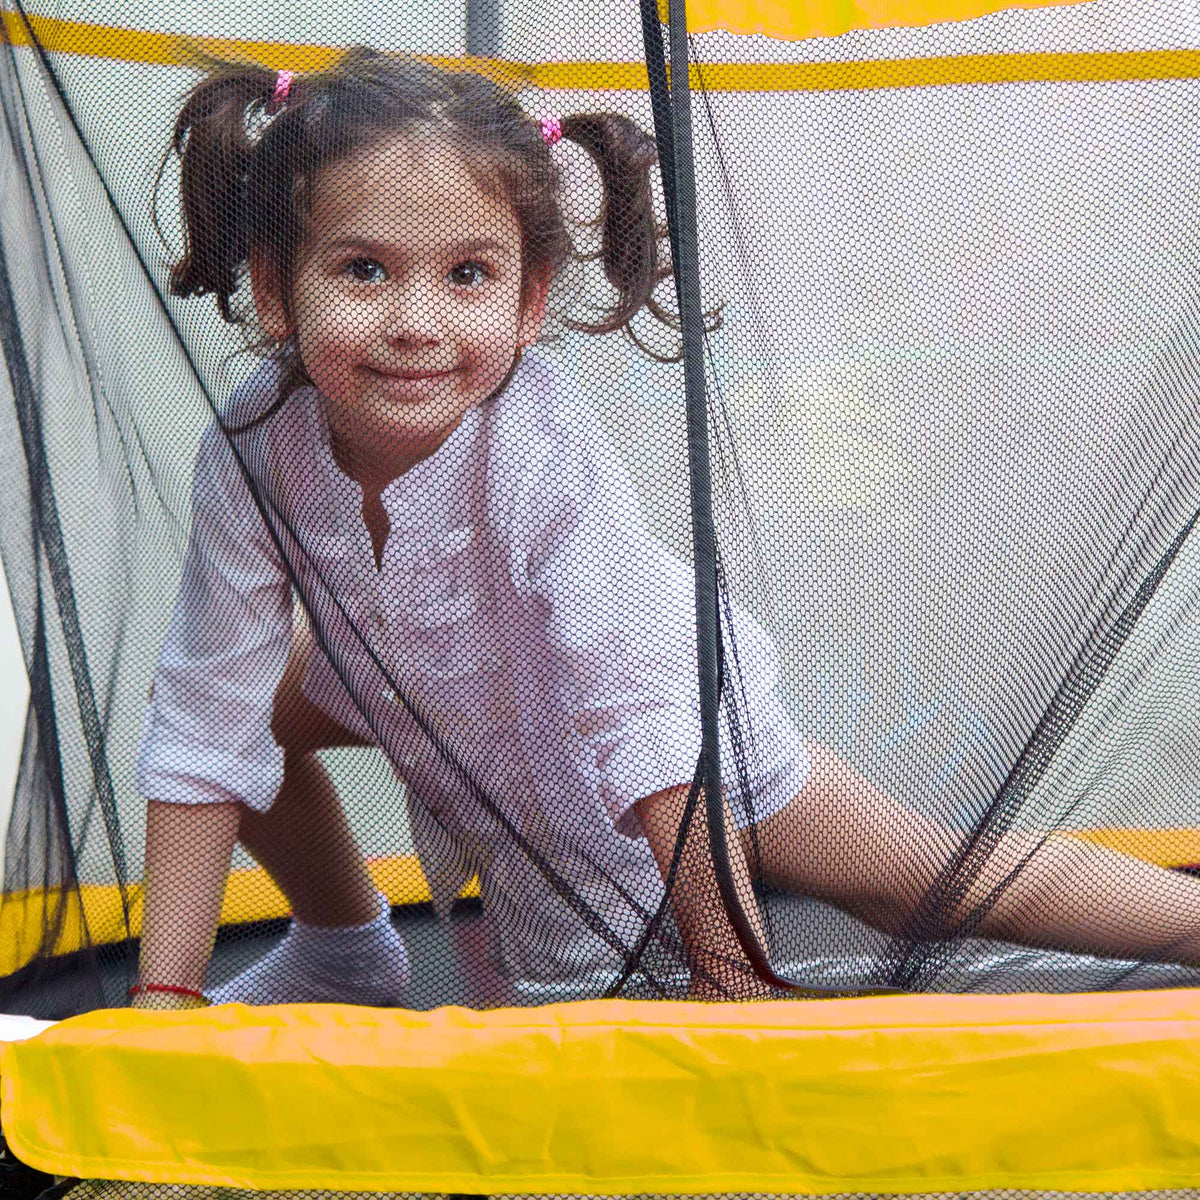 Children's Trampoline for Children, with Jumping Area And Protective Net,  Door with Zipper, 140cm, Maximum Load 100KG